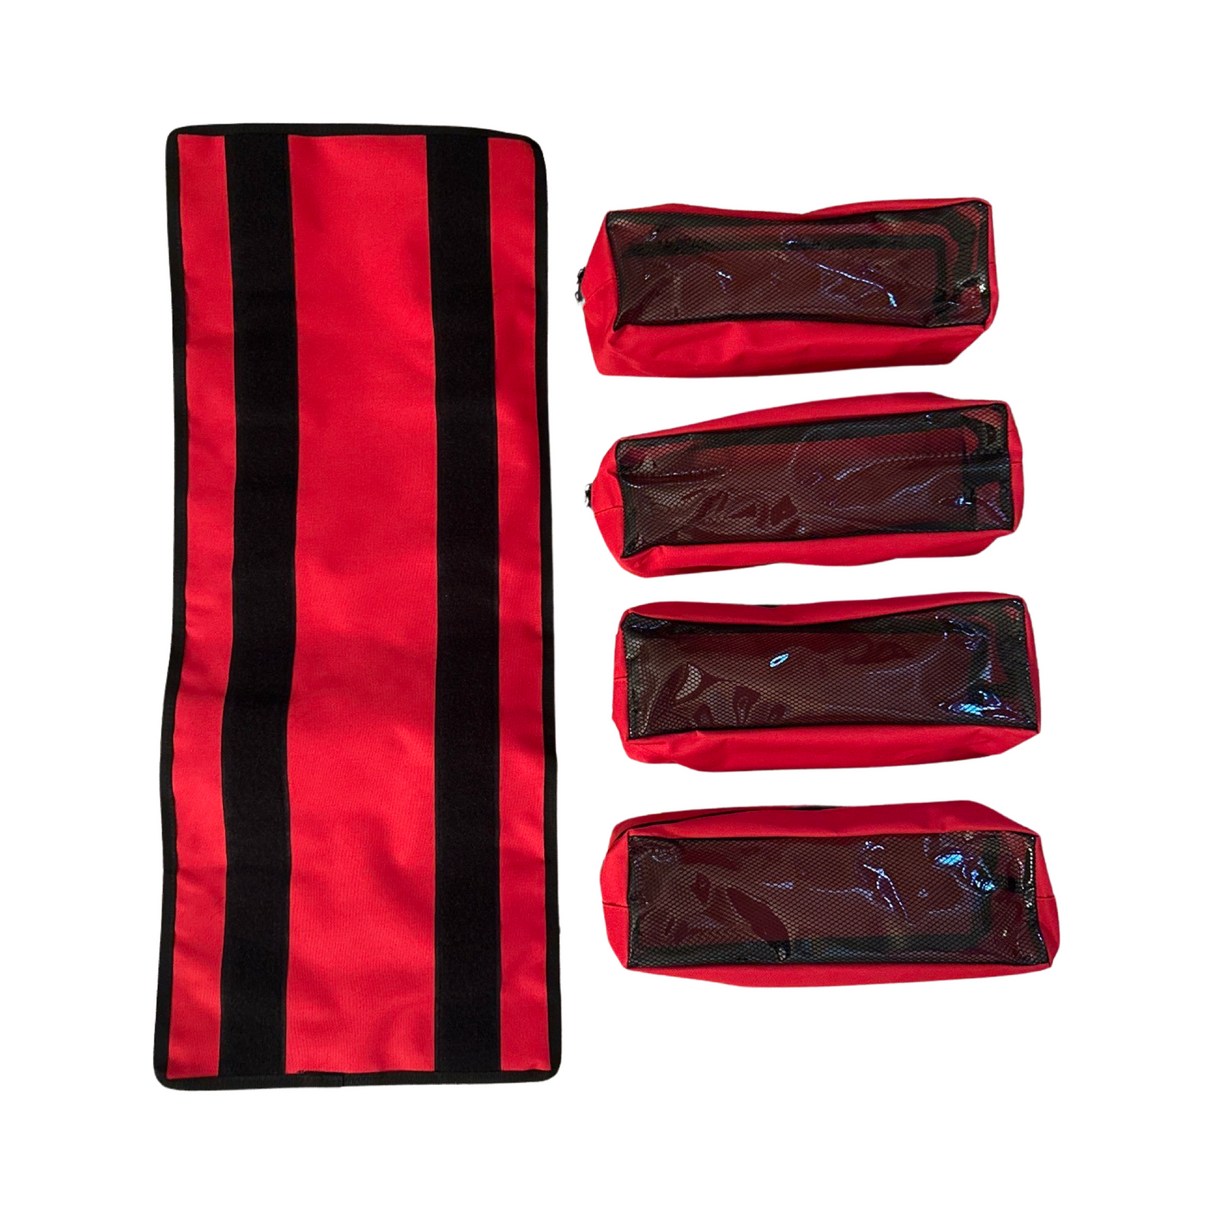 Medium Canvas Tool organizer bag with removeable pockets.